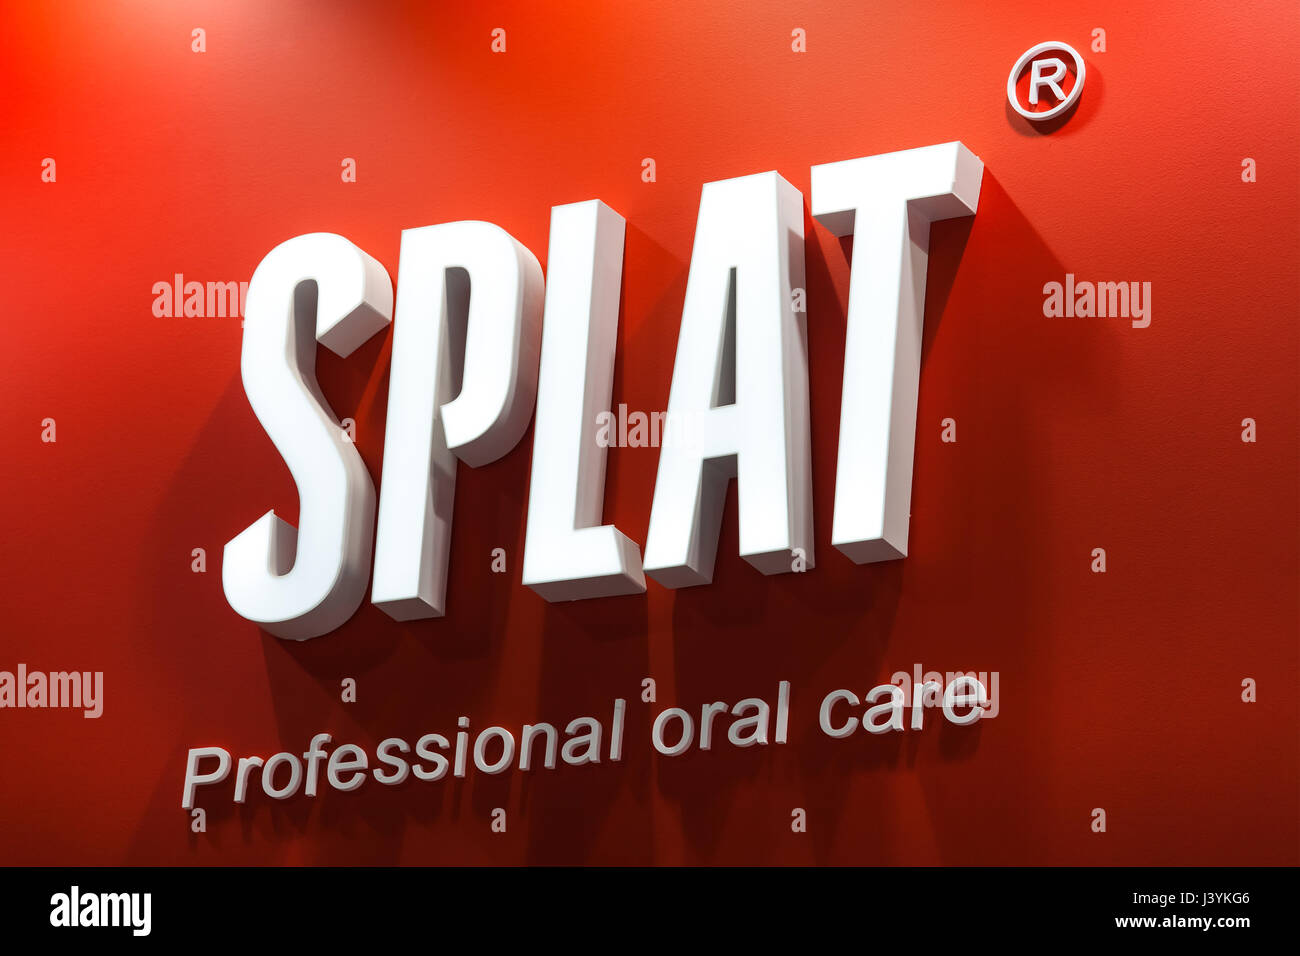 Splat company logo sign. Russia’s leading manufacturer of oral care products, household eco chemicals, and children’s cosmetics Stock Photo